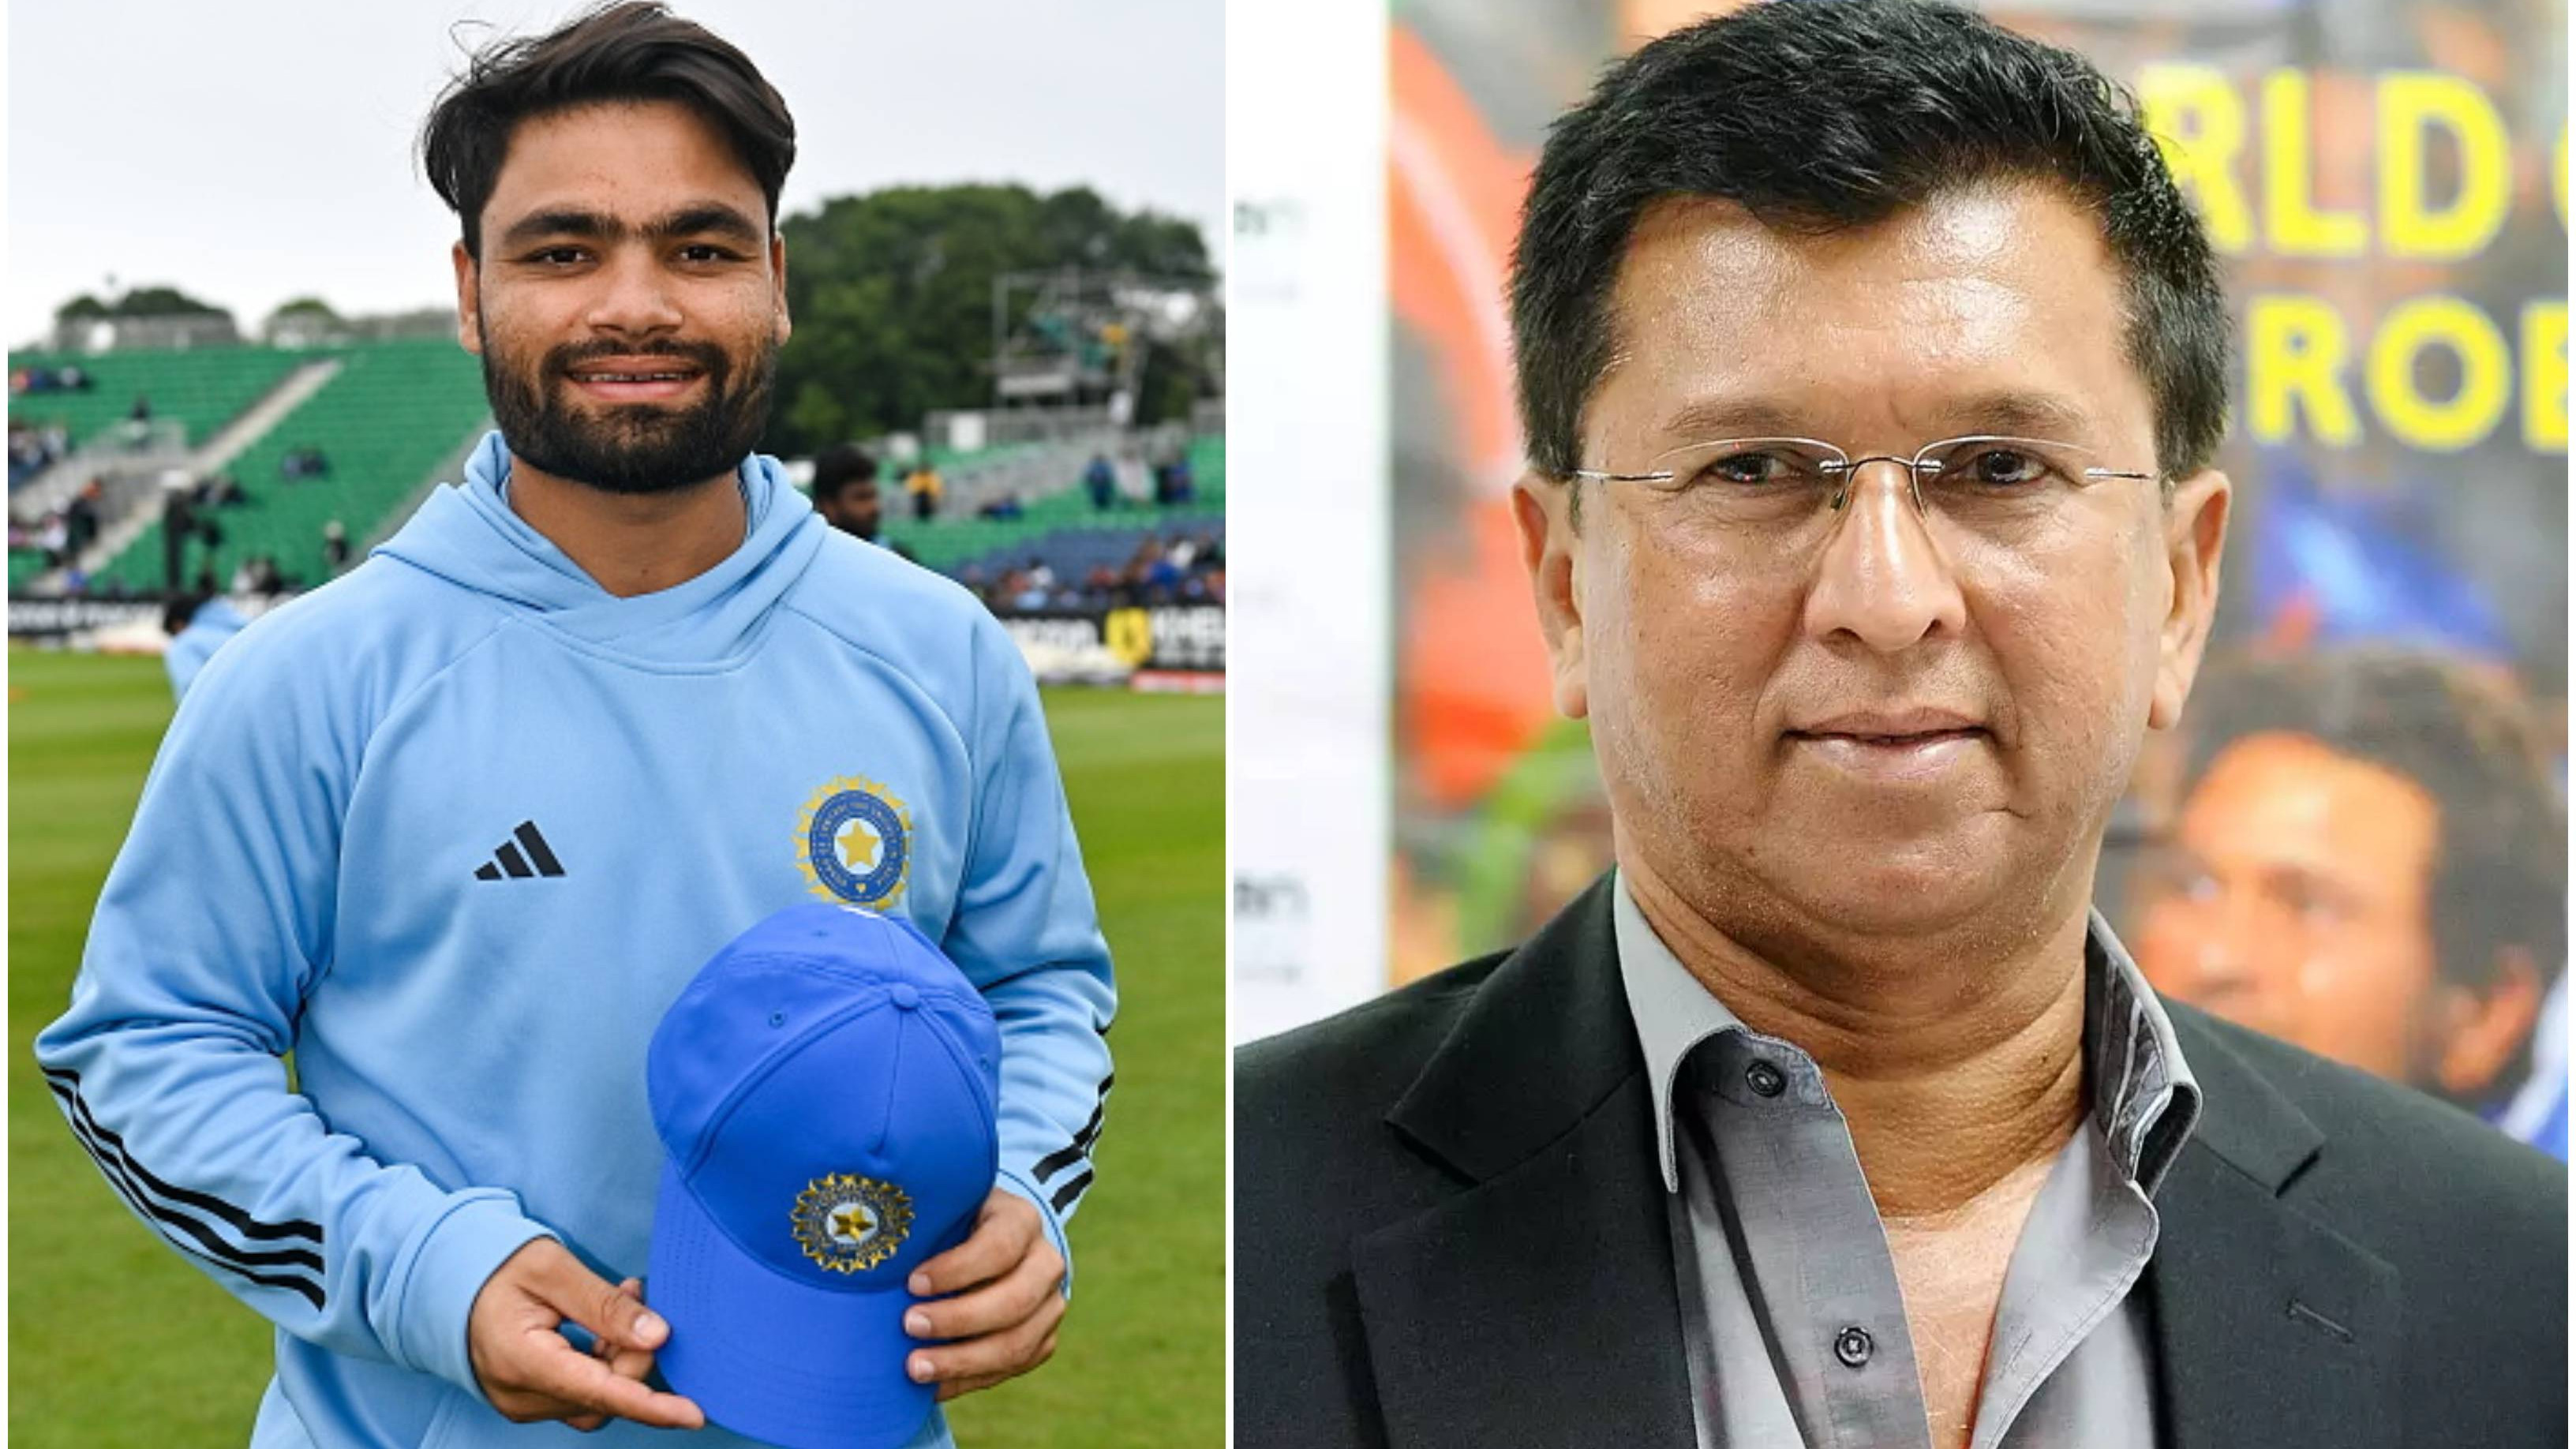 IRE v IND 2023: Rinku Singh can end up being a brilliant finisher like Dhoni and Yuvraj, opines Kiran More